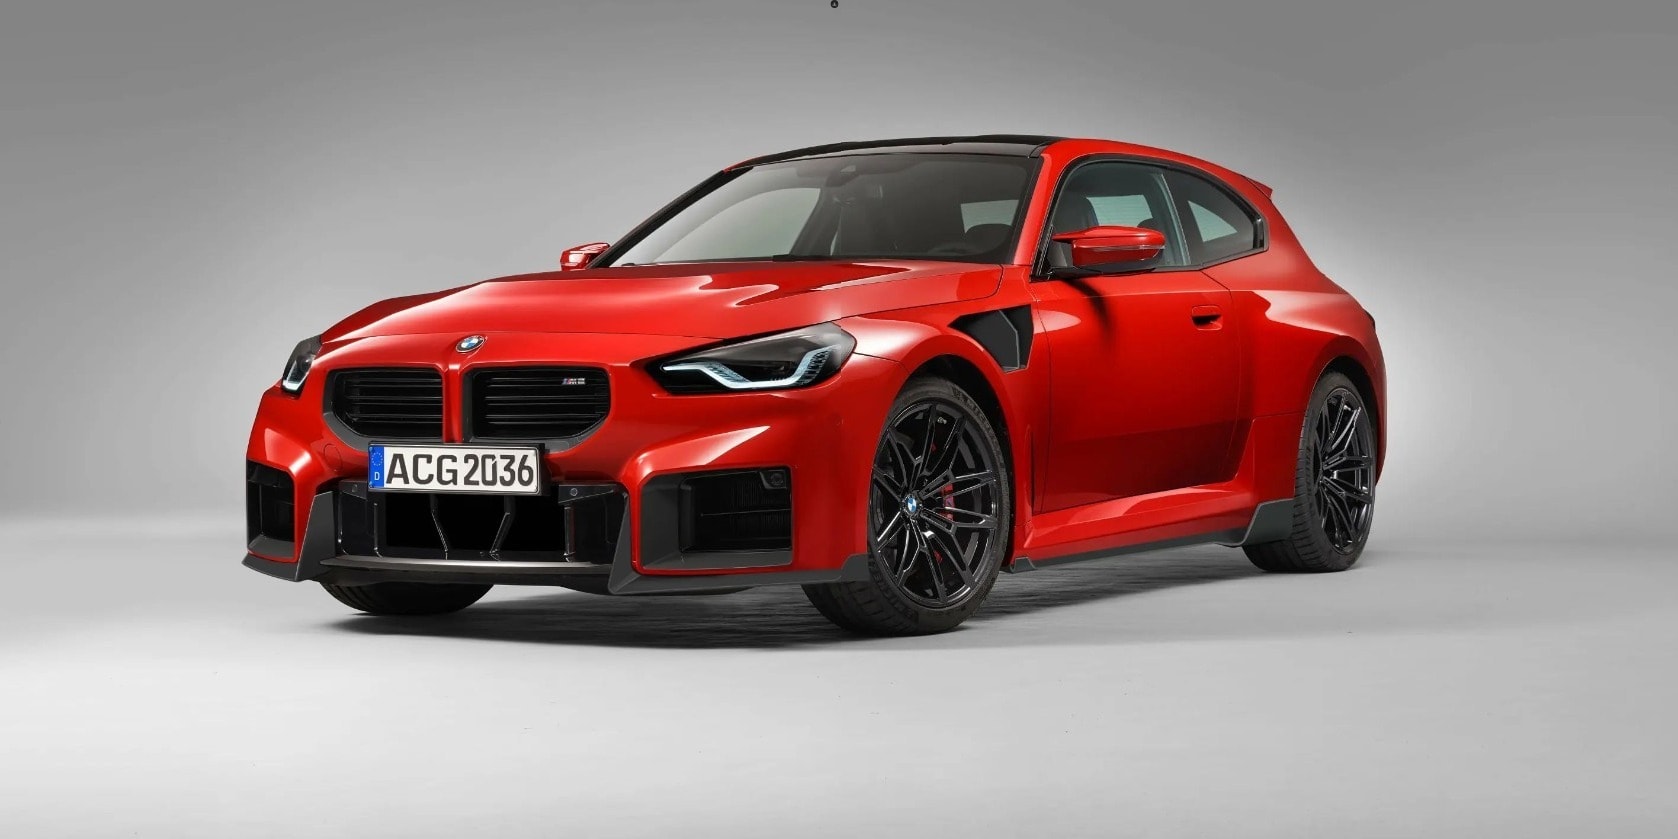 BMW Updates M5 Teasers, M2 Concepts, and Design Controversy